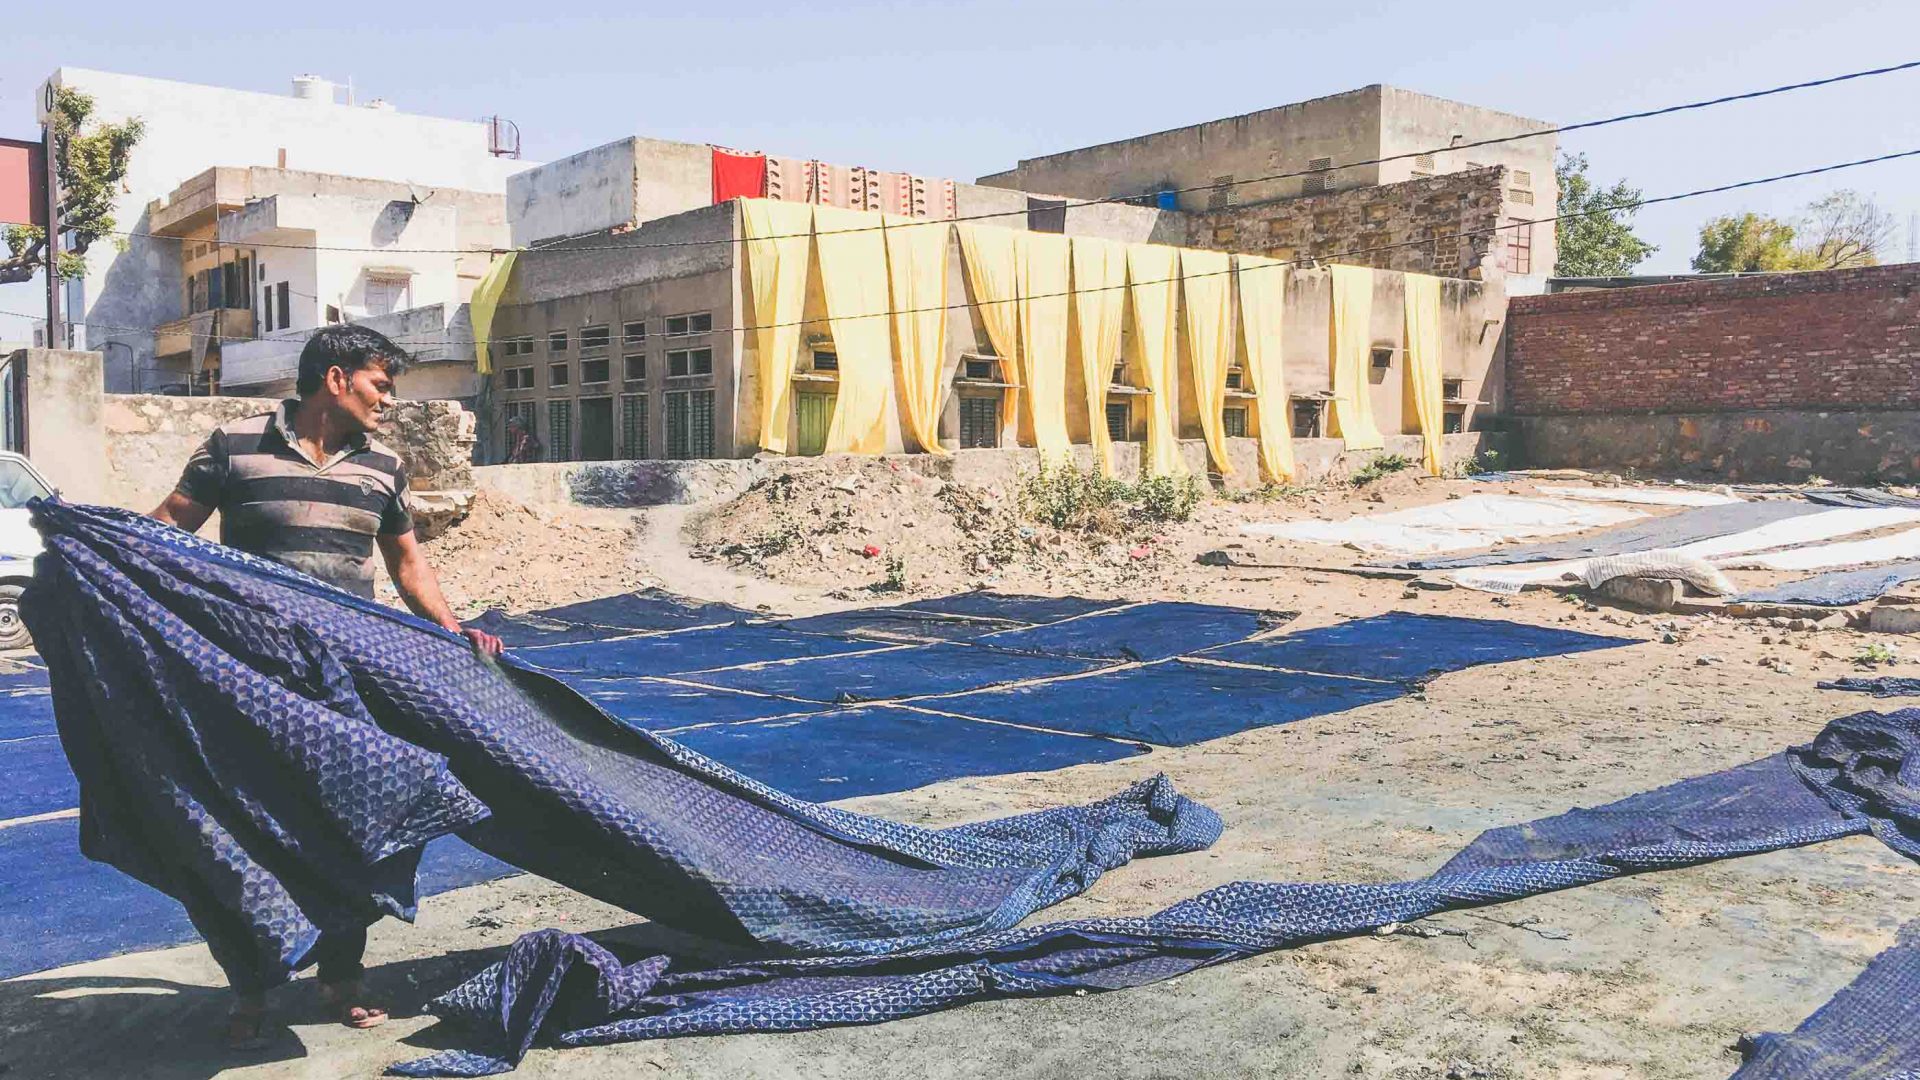 A man lays out textiles dyed in indigo in Bagru's drying fields, Rajasthan, India.